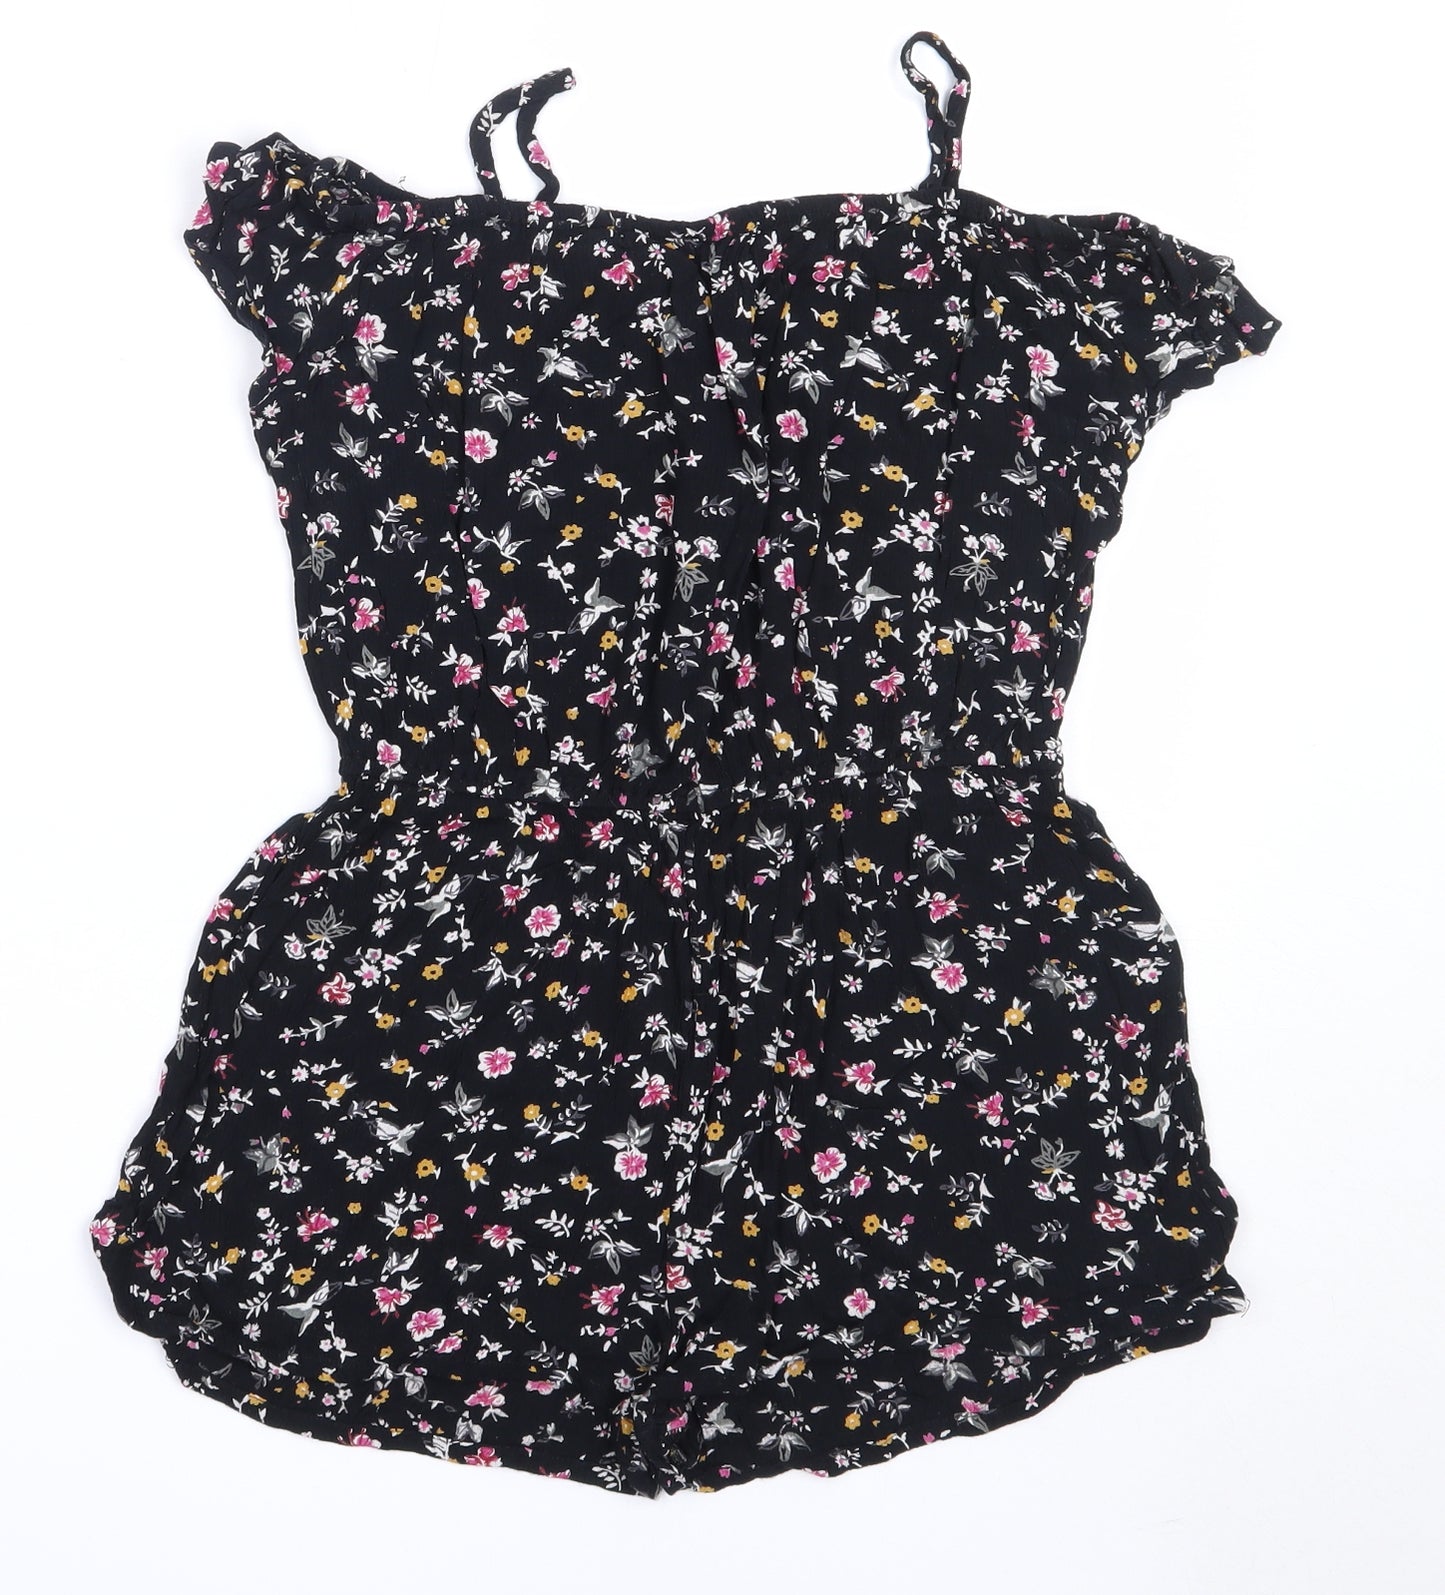 Miss Evie Girls Black Floral Viscose Playsuit One-Piece Size 12 Years